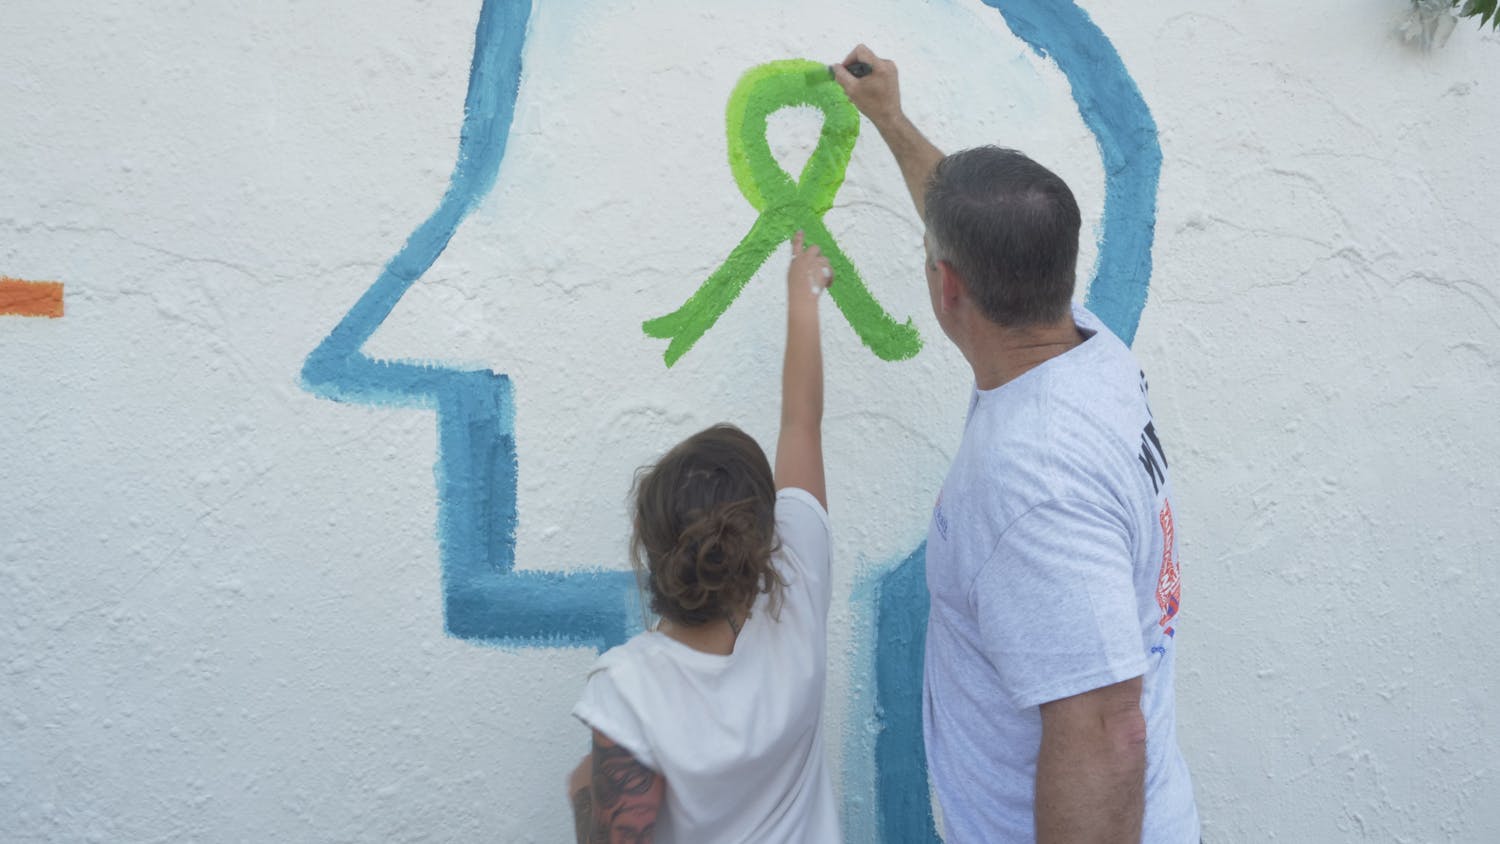 Laura Martin, 28, a peer support specialist at UF Health and Joe Munson, Director of Clinical Services at UF Health, paint the mental health awareness ribbon together on the mural at Southwest 34th Street.